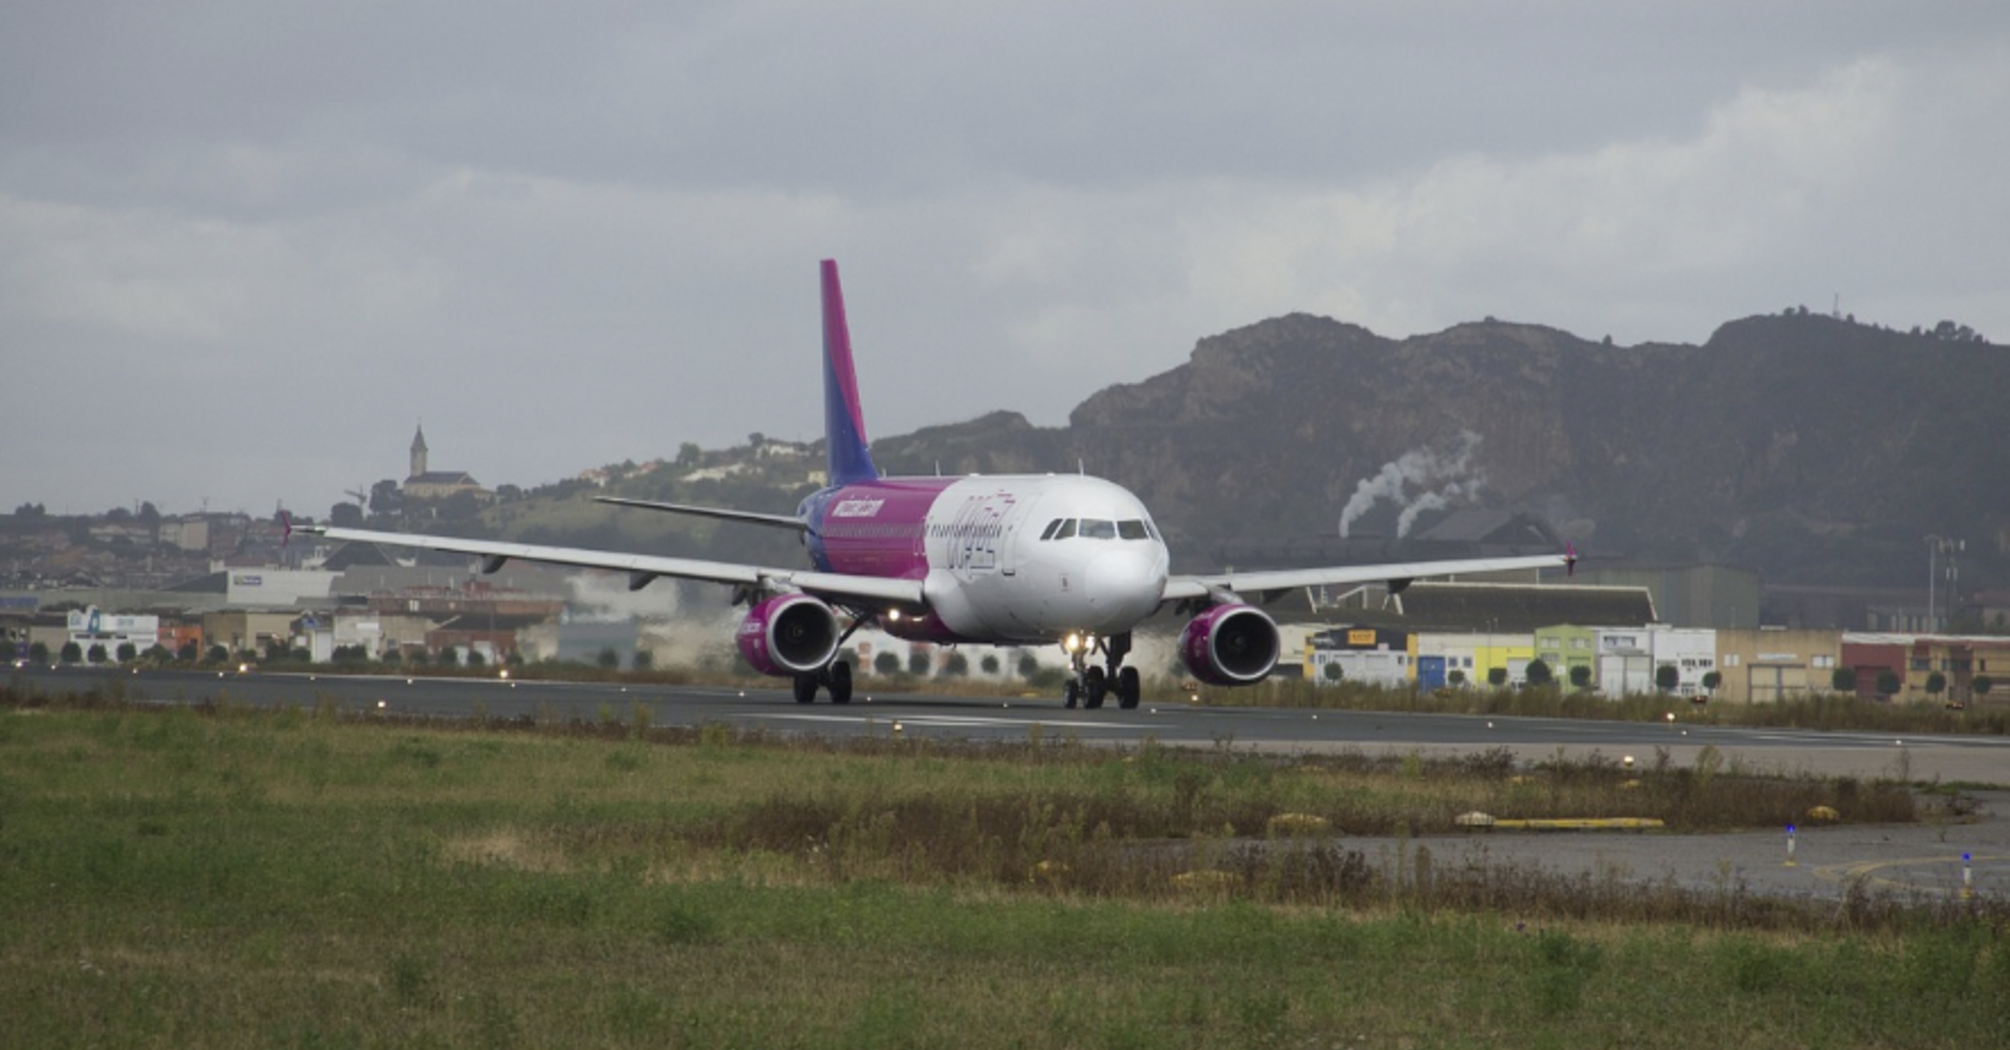 Wizz Air passengers may face disruptions and delays due to strikes: dates announced